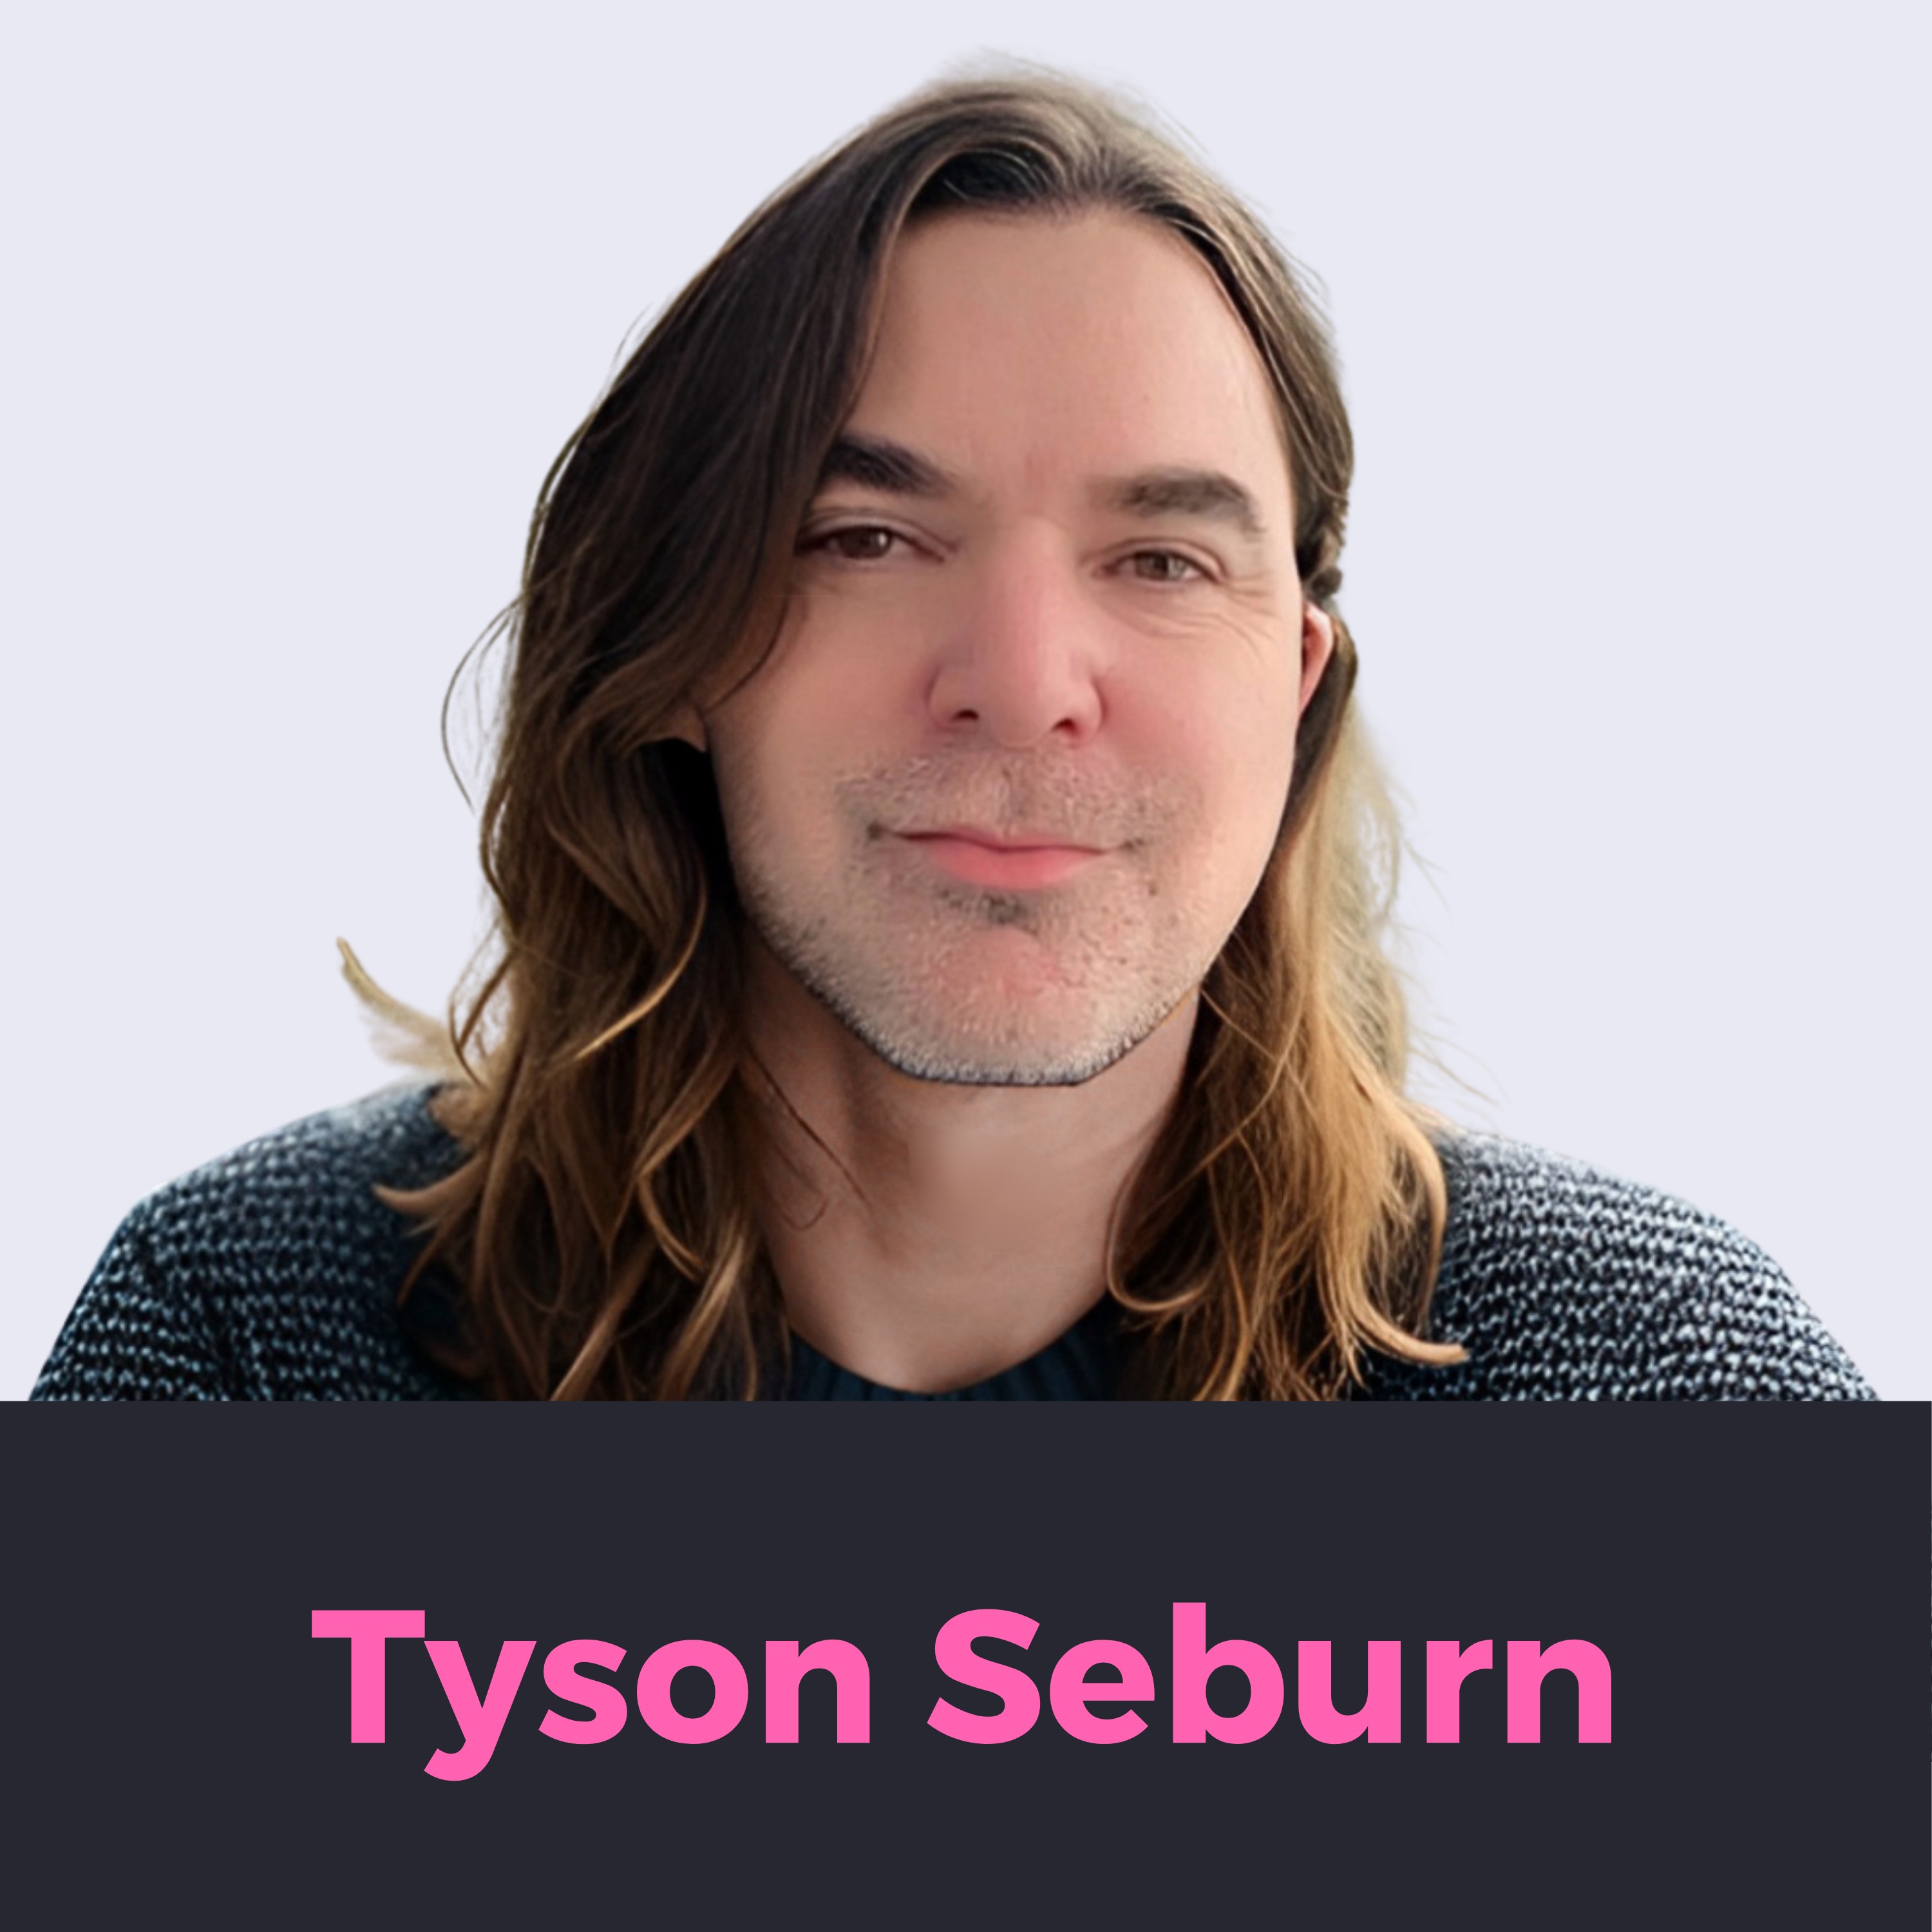 A Disruptive Approach to Teaching and Materials with Tyson Seburn